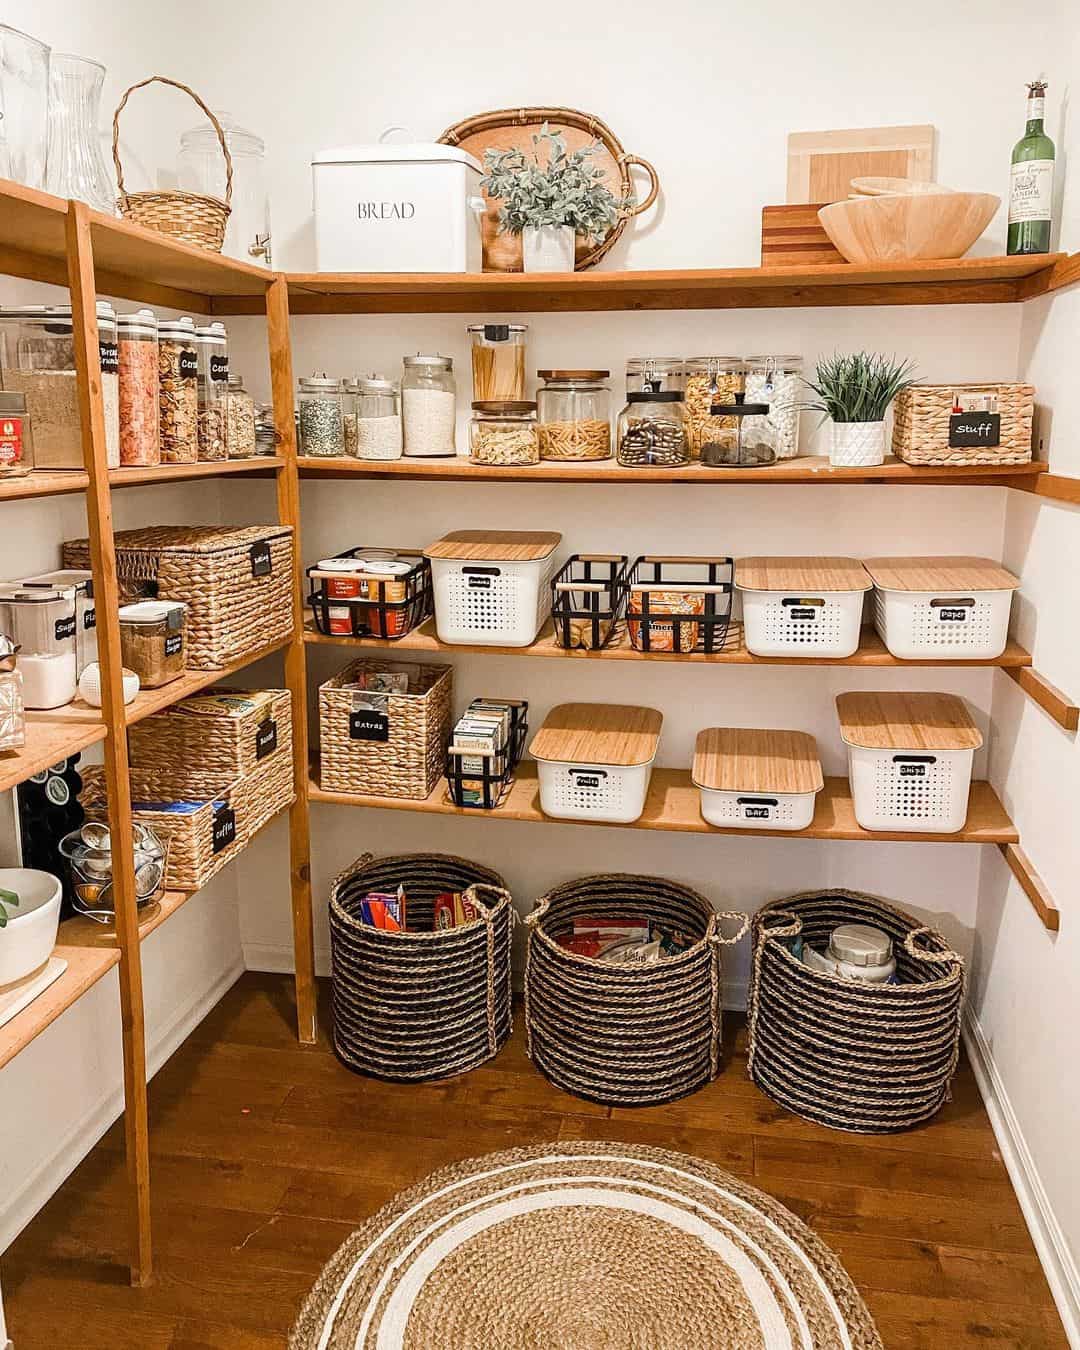 Shelves and Decorative Baskets in Perfect Harmony